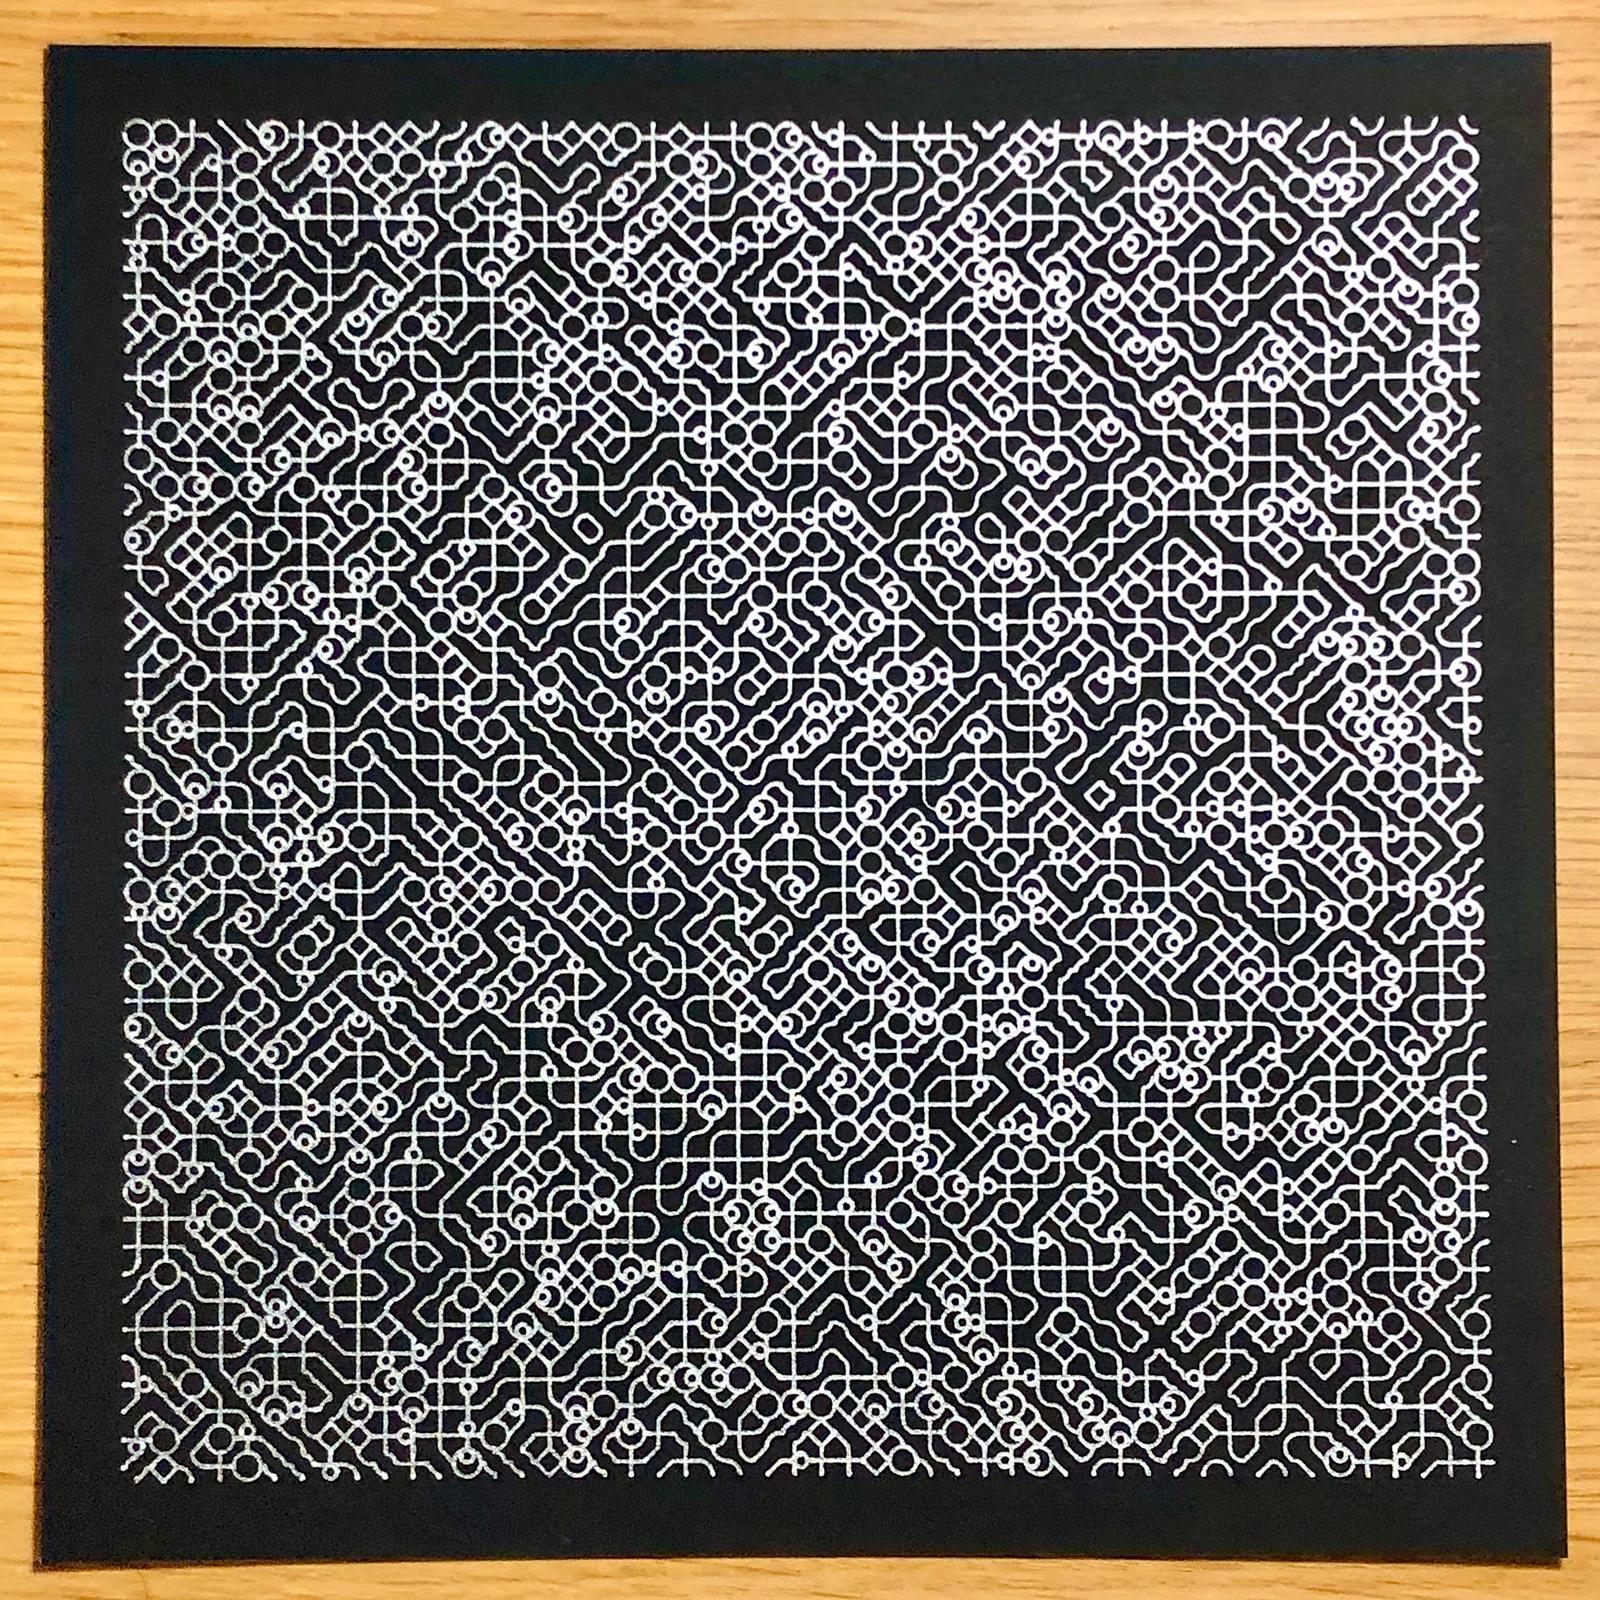 Black paper covered in a randomised pattern of various tiny diamond, circle, and line-based shapes, drawn in silver pen